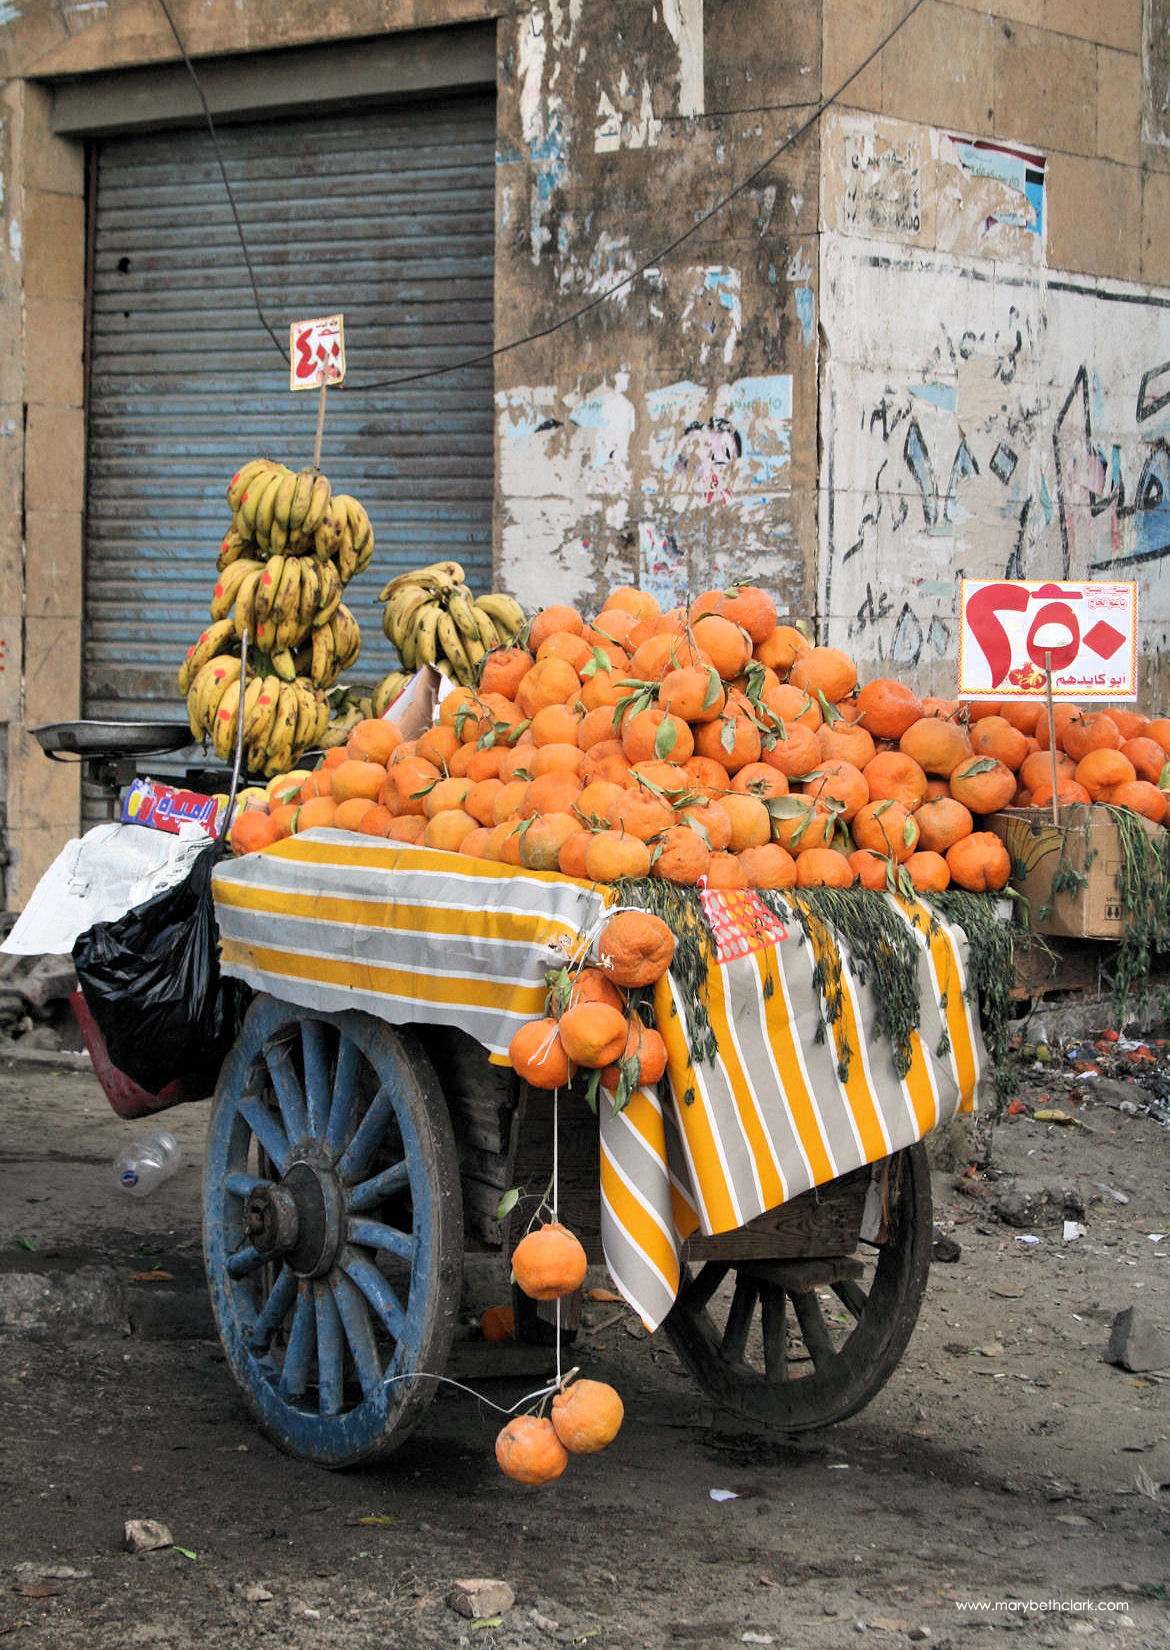 Travel - Africa - Egypt - Cairo - Oranges and Bananas